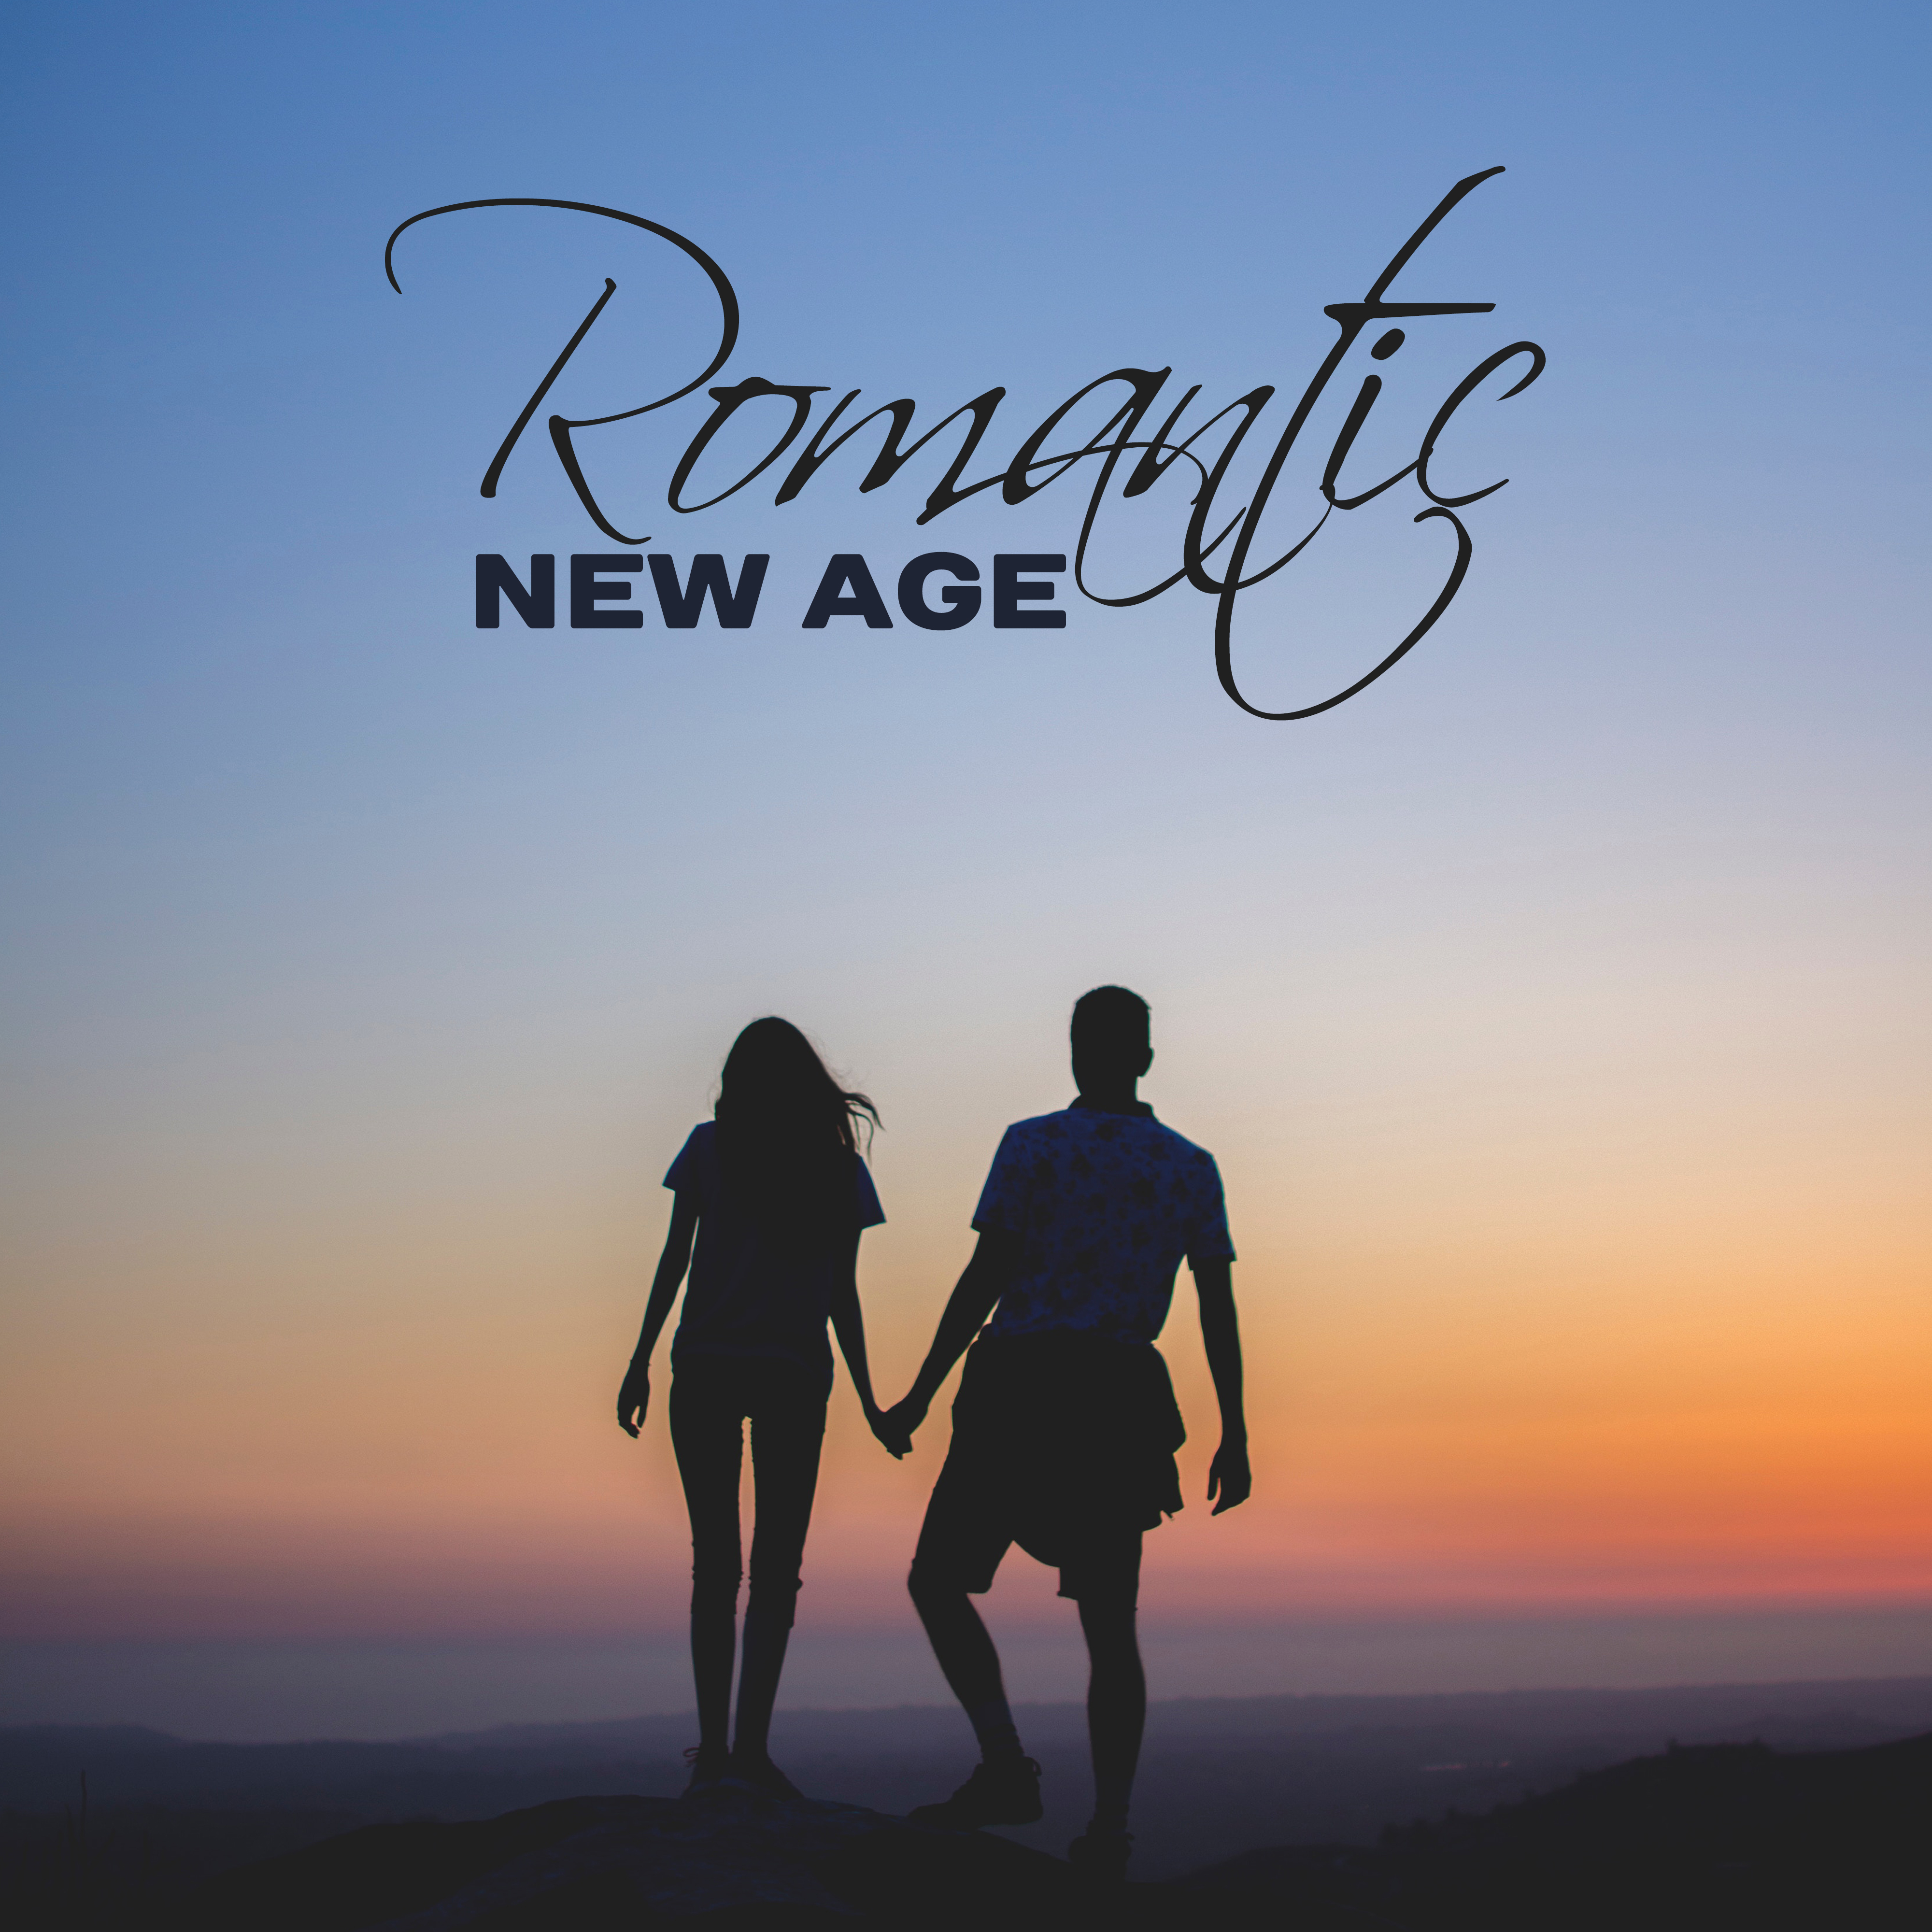 Romantic New Age – Tantric Massage, **** Vibes, Pure Relaxation, Made to Love, Sensuality